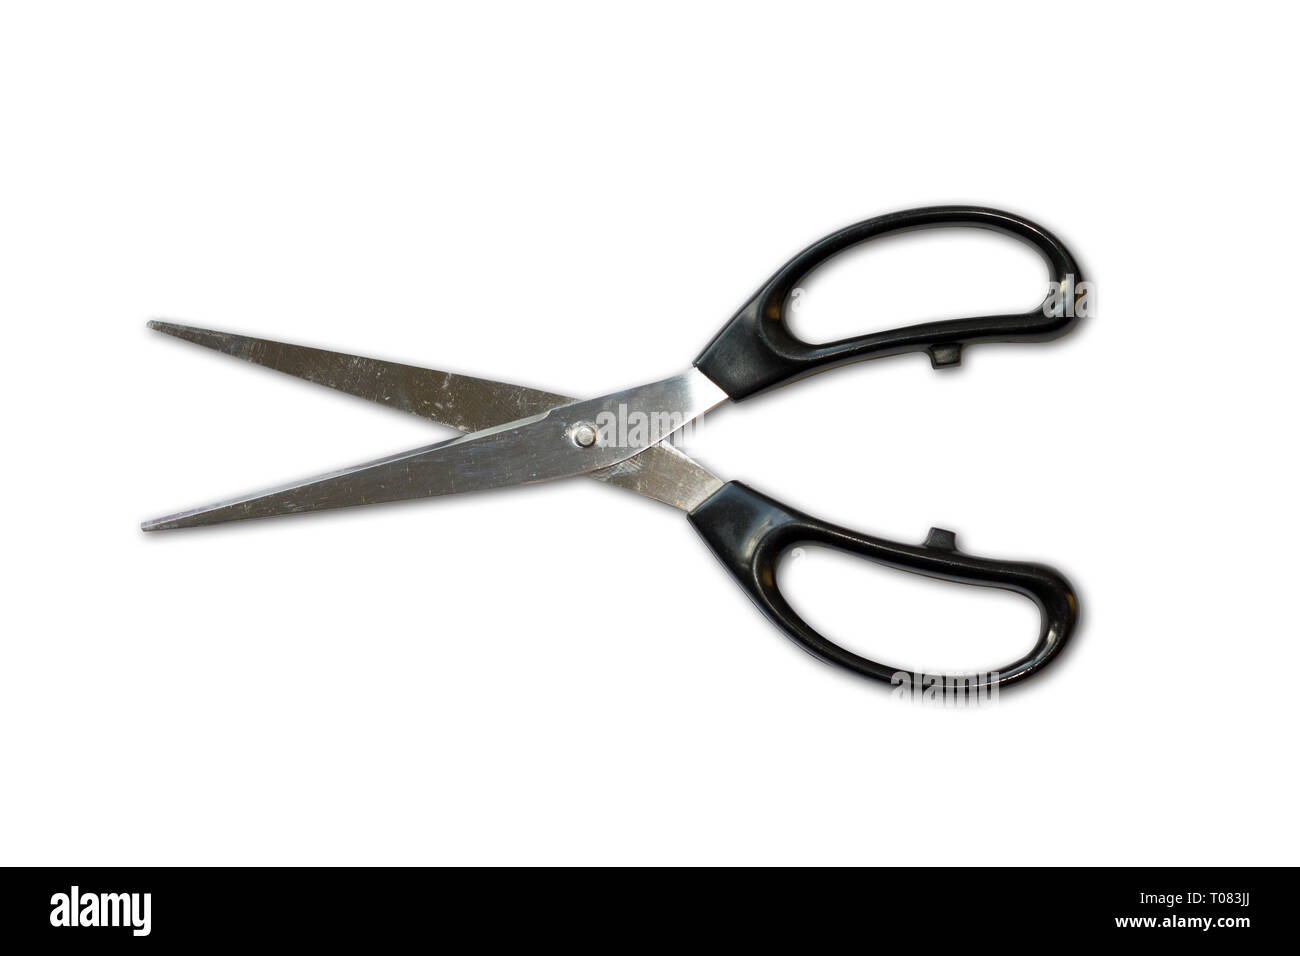 Scissors with a black handle in an open position Stock Photo